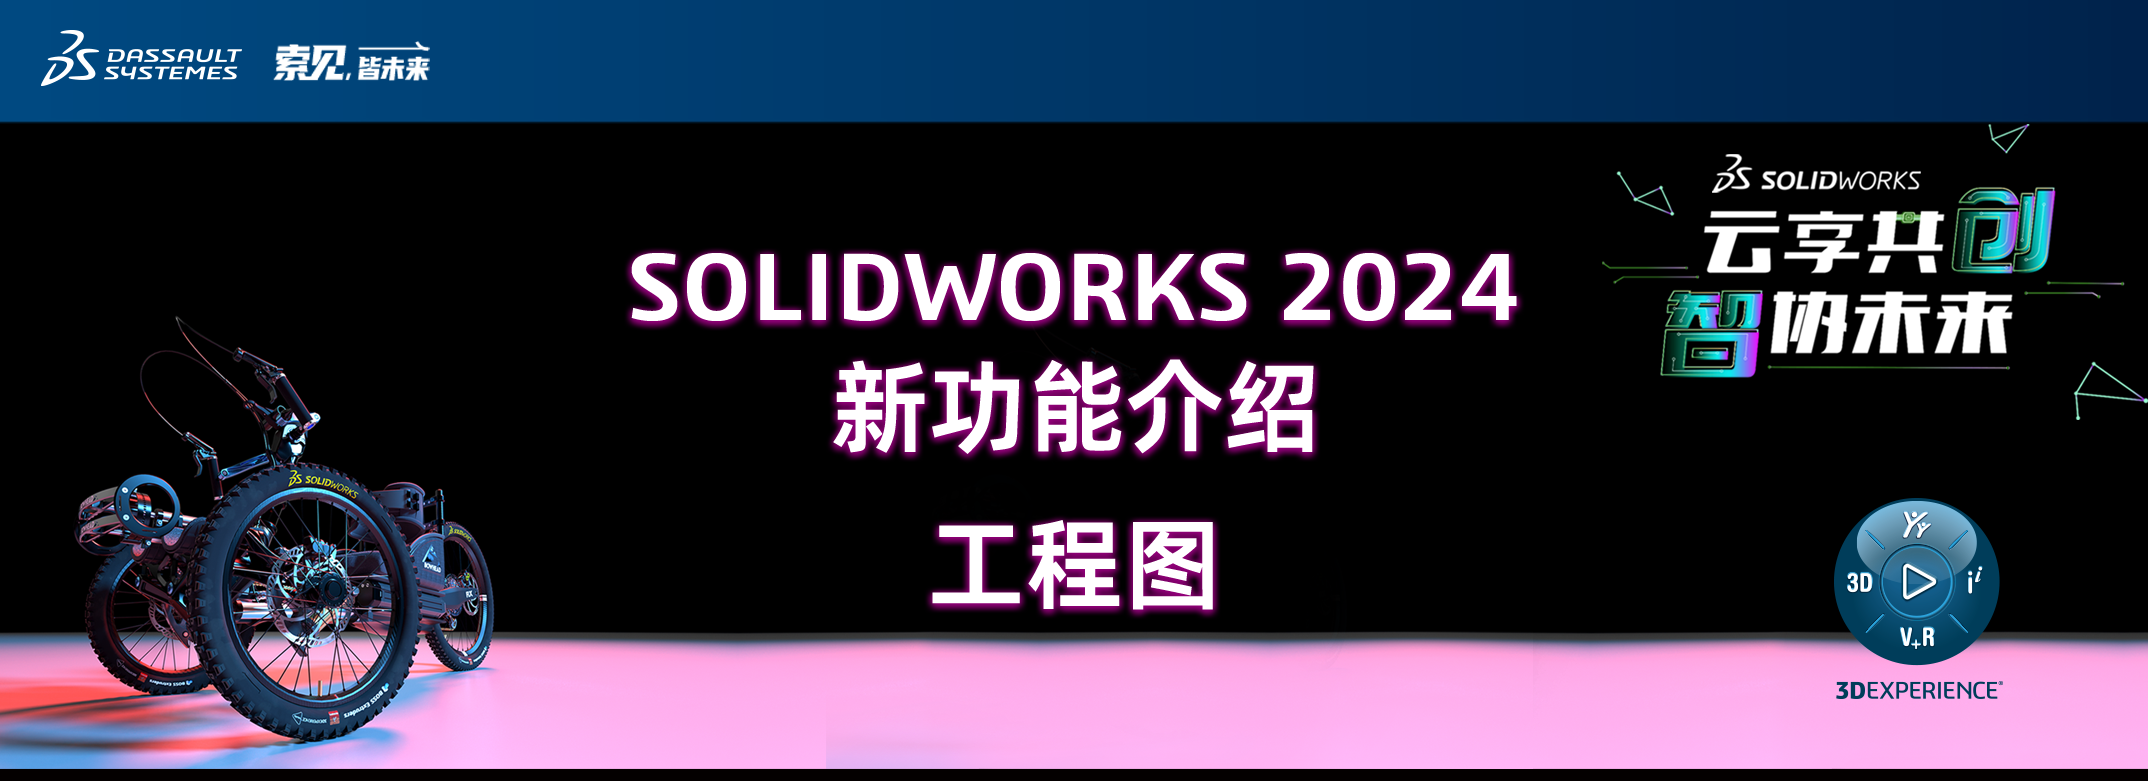 SOLIDWORKS 2024 工程图